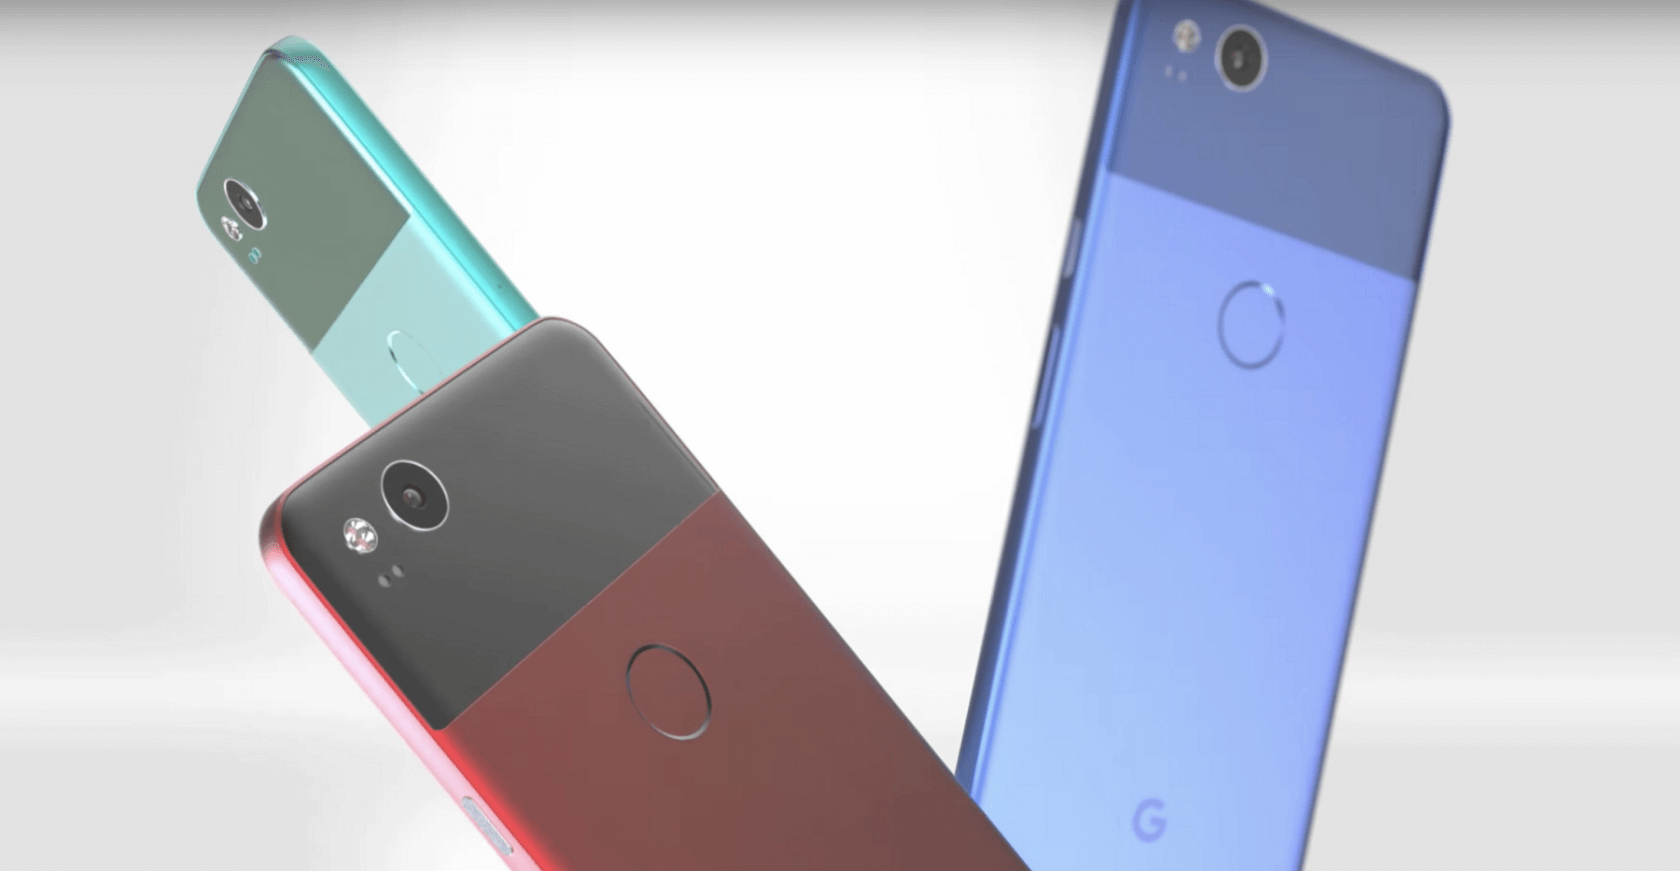 Pixel 2 handsets rumored to be unveiled on October 5, will feature Snapdragon 836 chipset